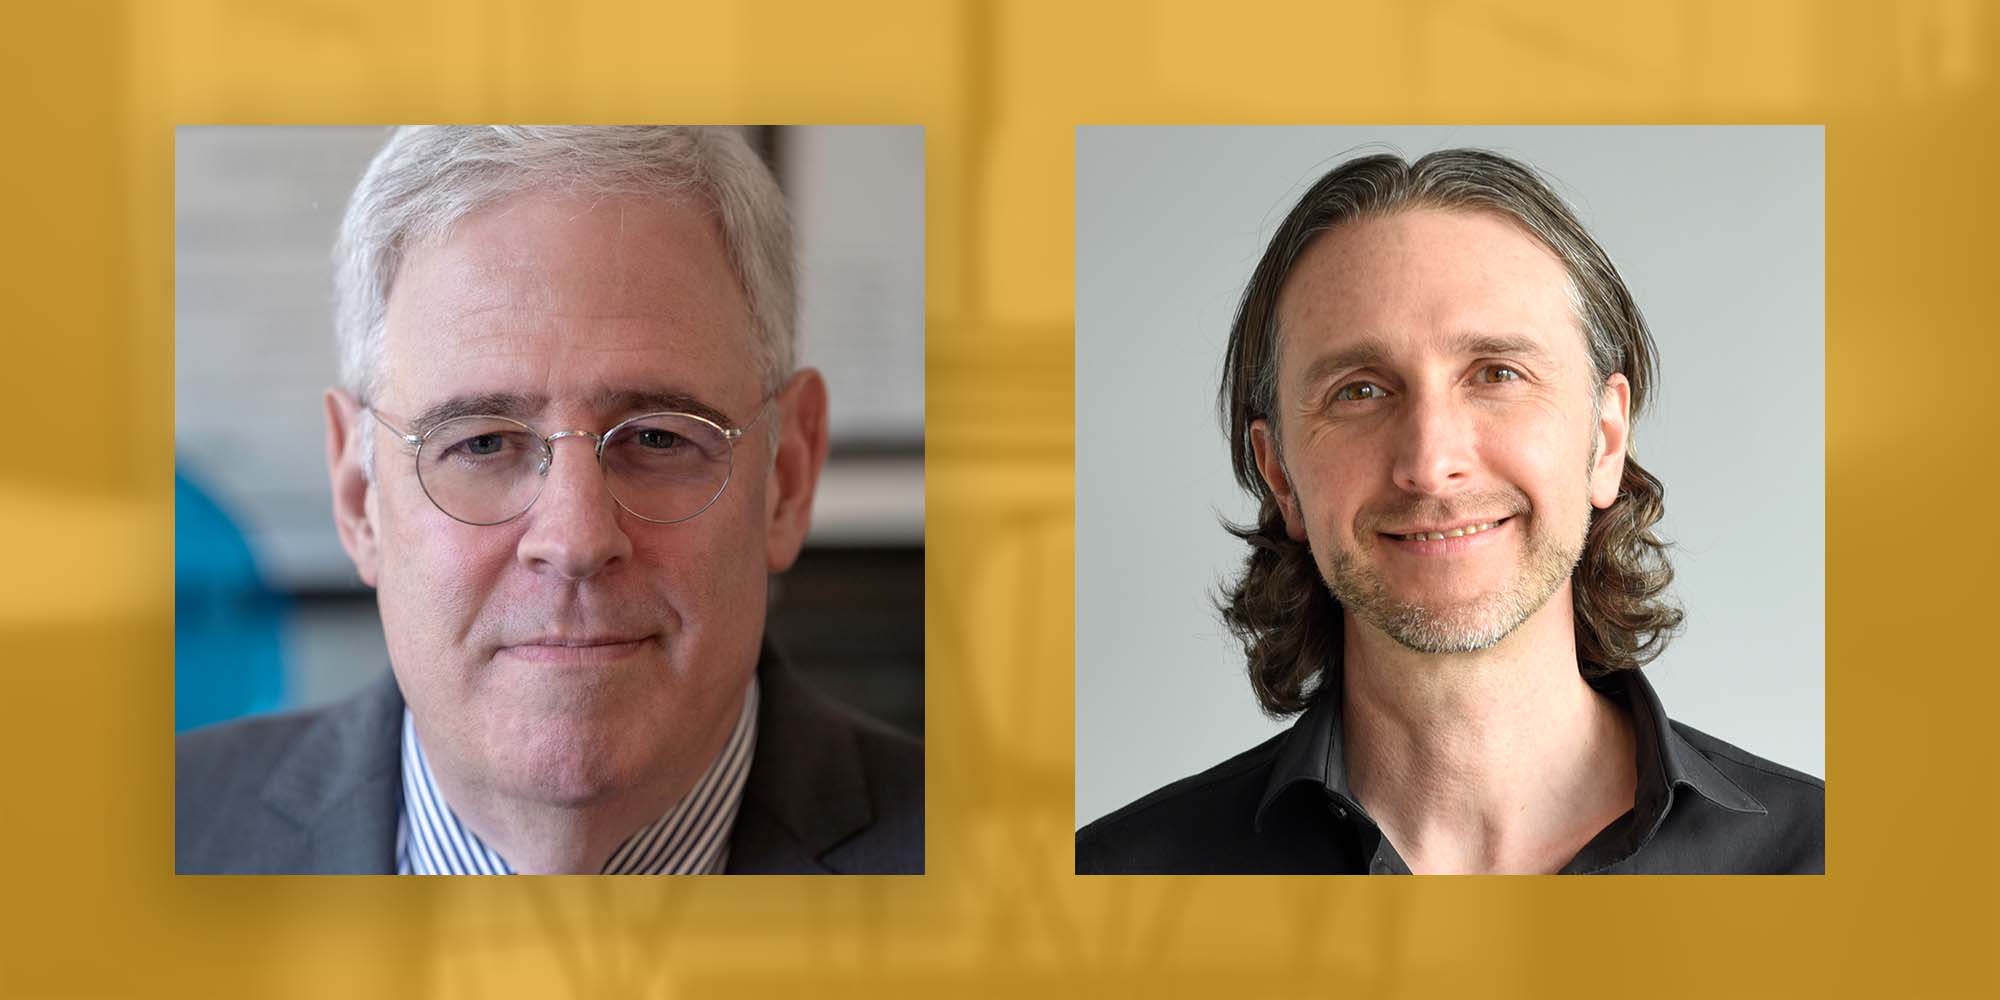 Profile images of Joseph J. Fins and Eric Racine with yellow background